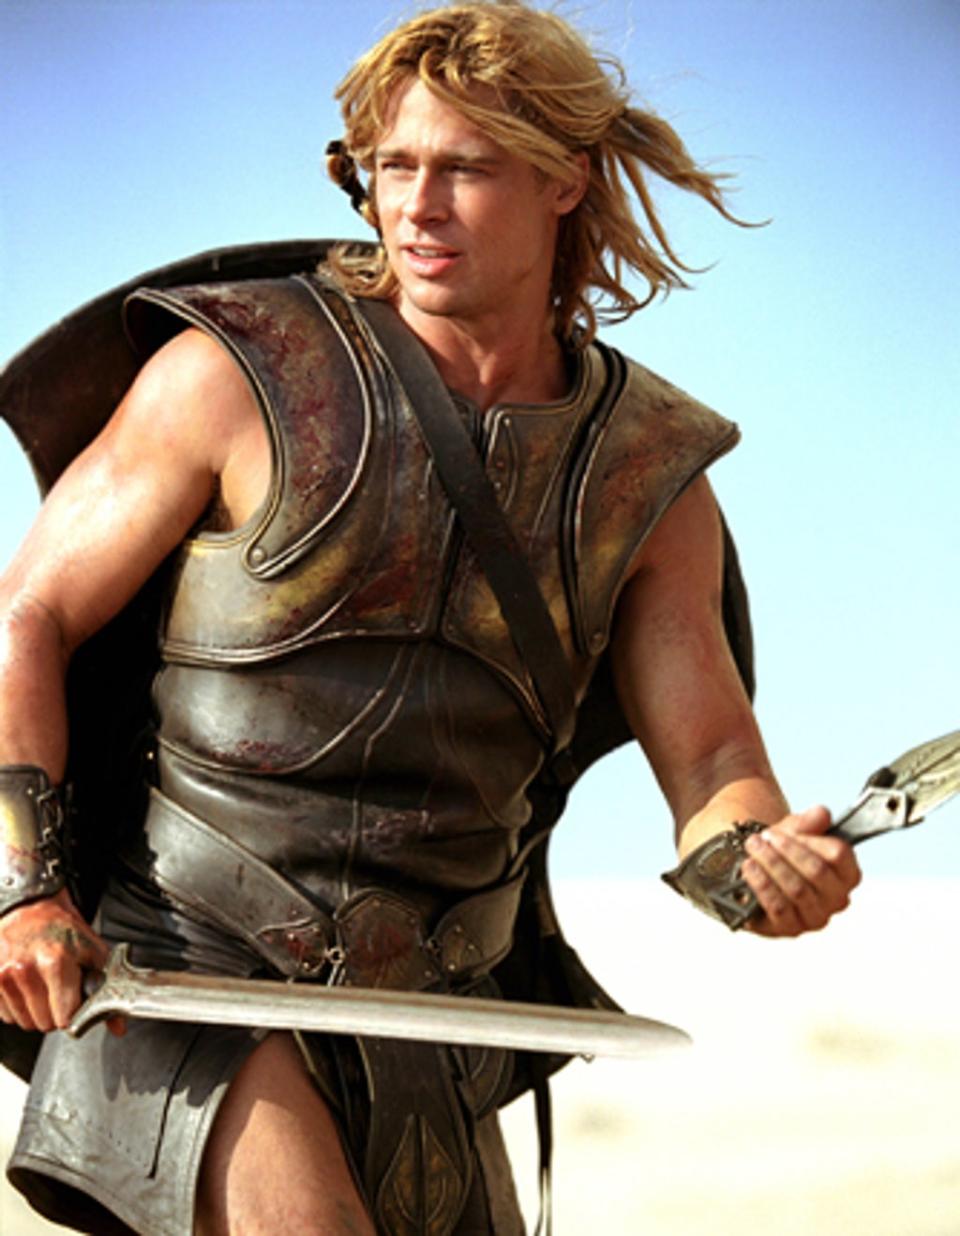 Kruger played Helen of Troy in the 2004 film, also starring Brad Pitt as Achilles (IMAGENET)